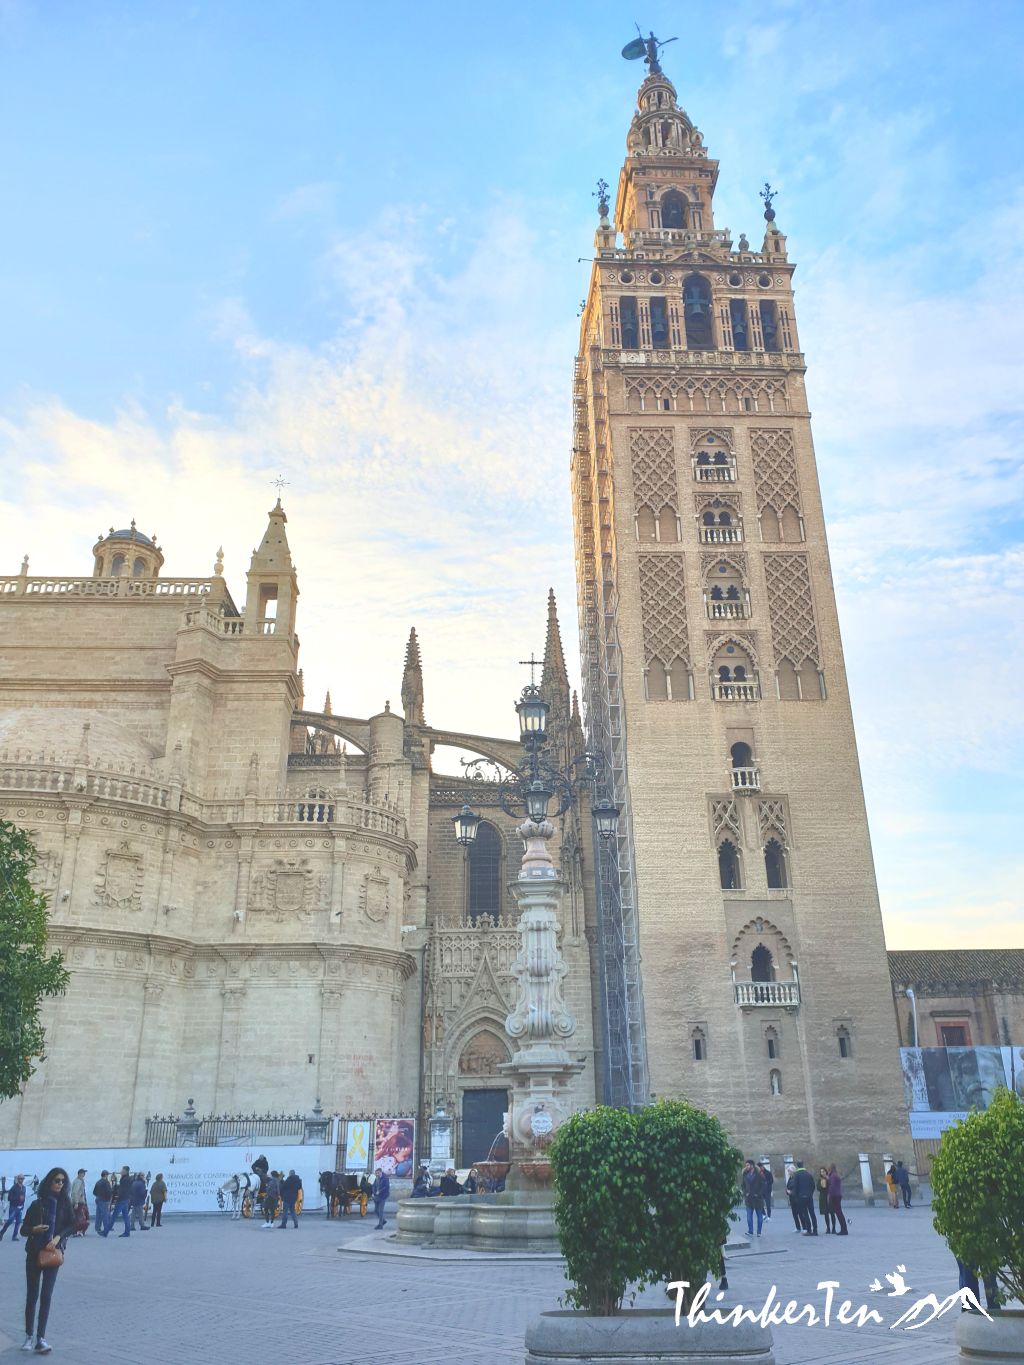 Seville Cathedral and Giralda Tower at Seville, Spain